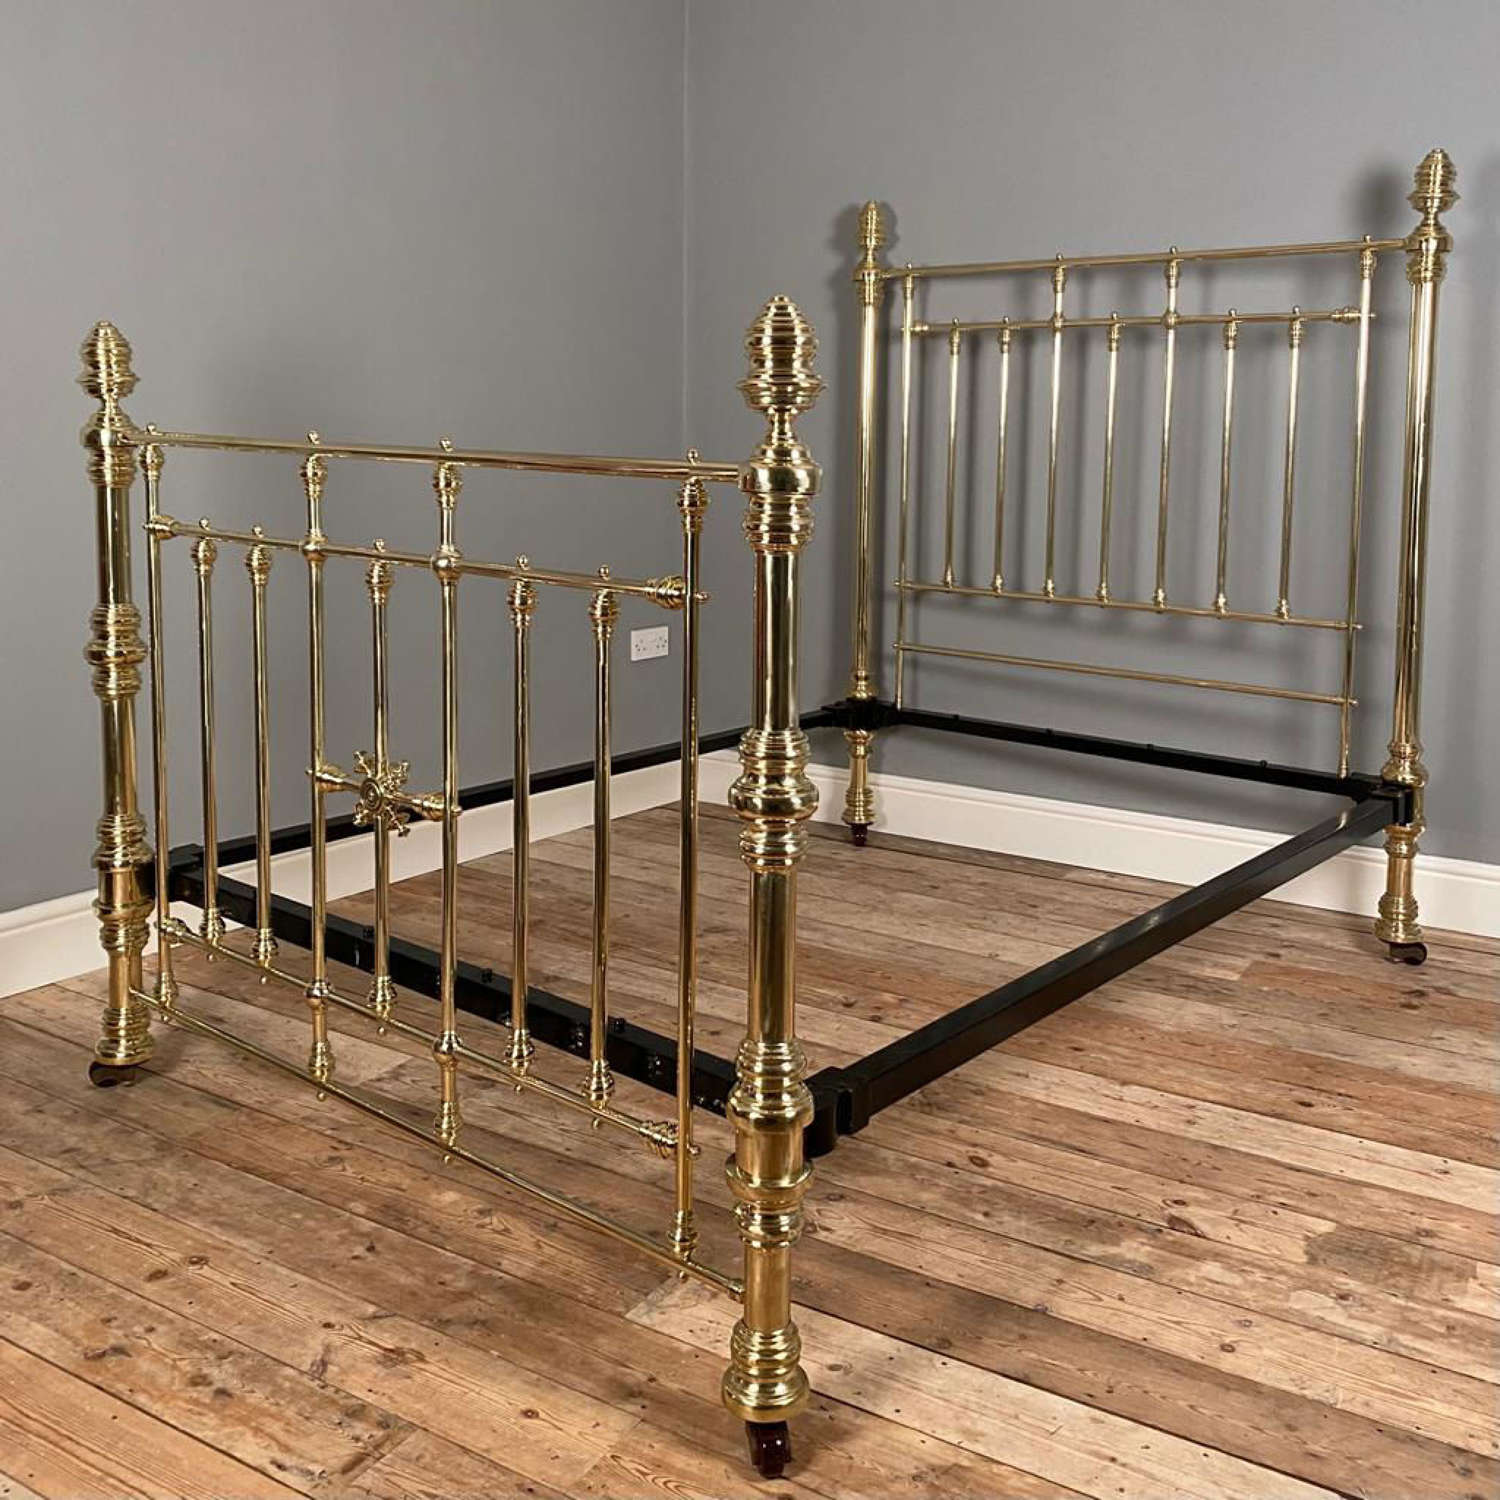 Superb Quality Hoskins & Sewell Brass Double Bed